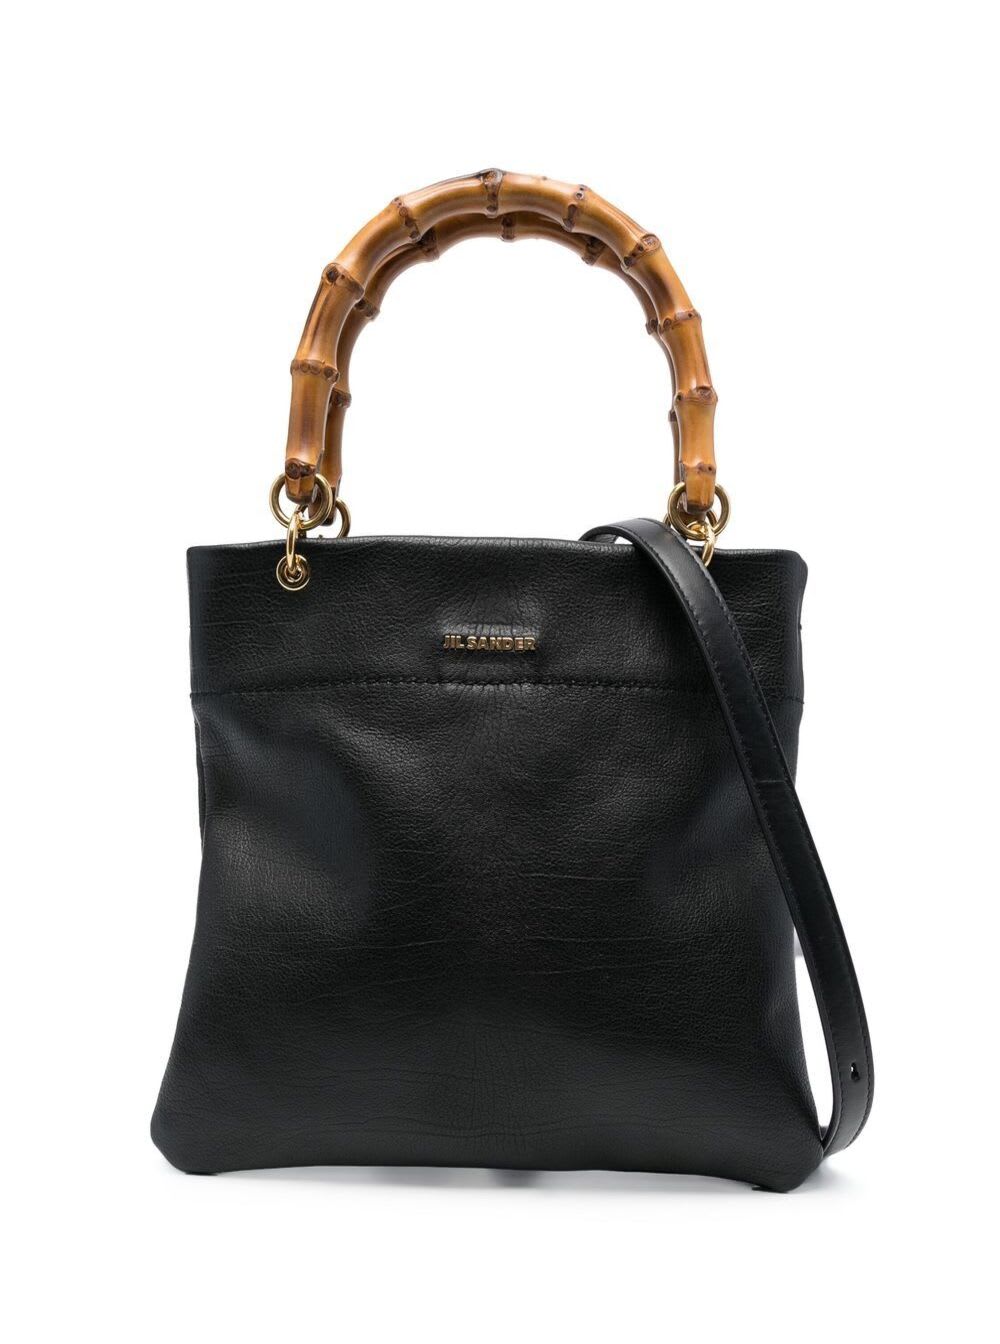 JIL SANDER SMALL BLACK TOTE BAG WITH BAMBOO HANDLES IN LEATHER WOMAN